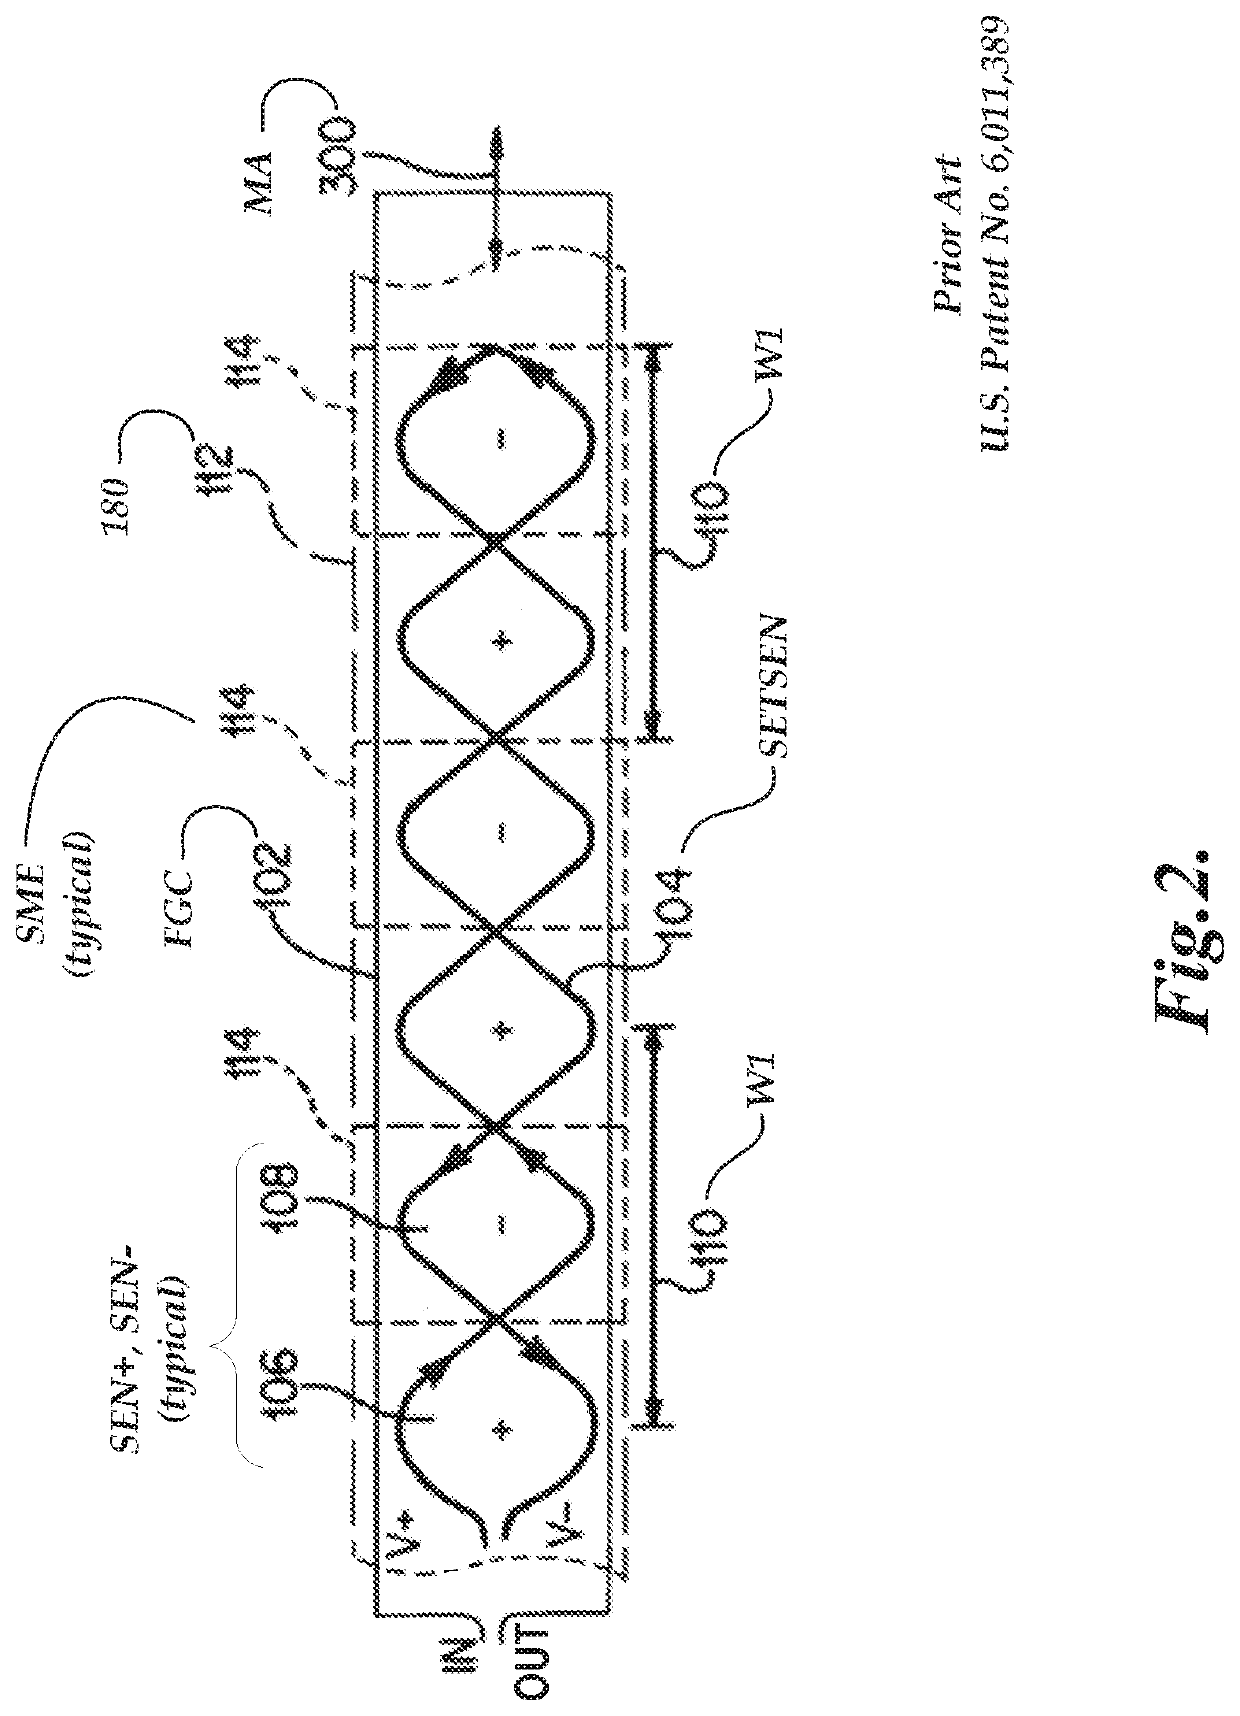 Scale configuration for inductive position encoder